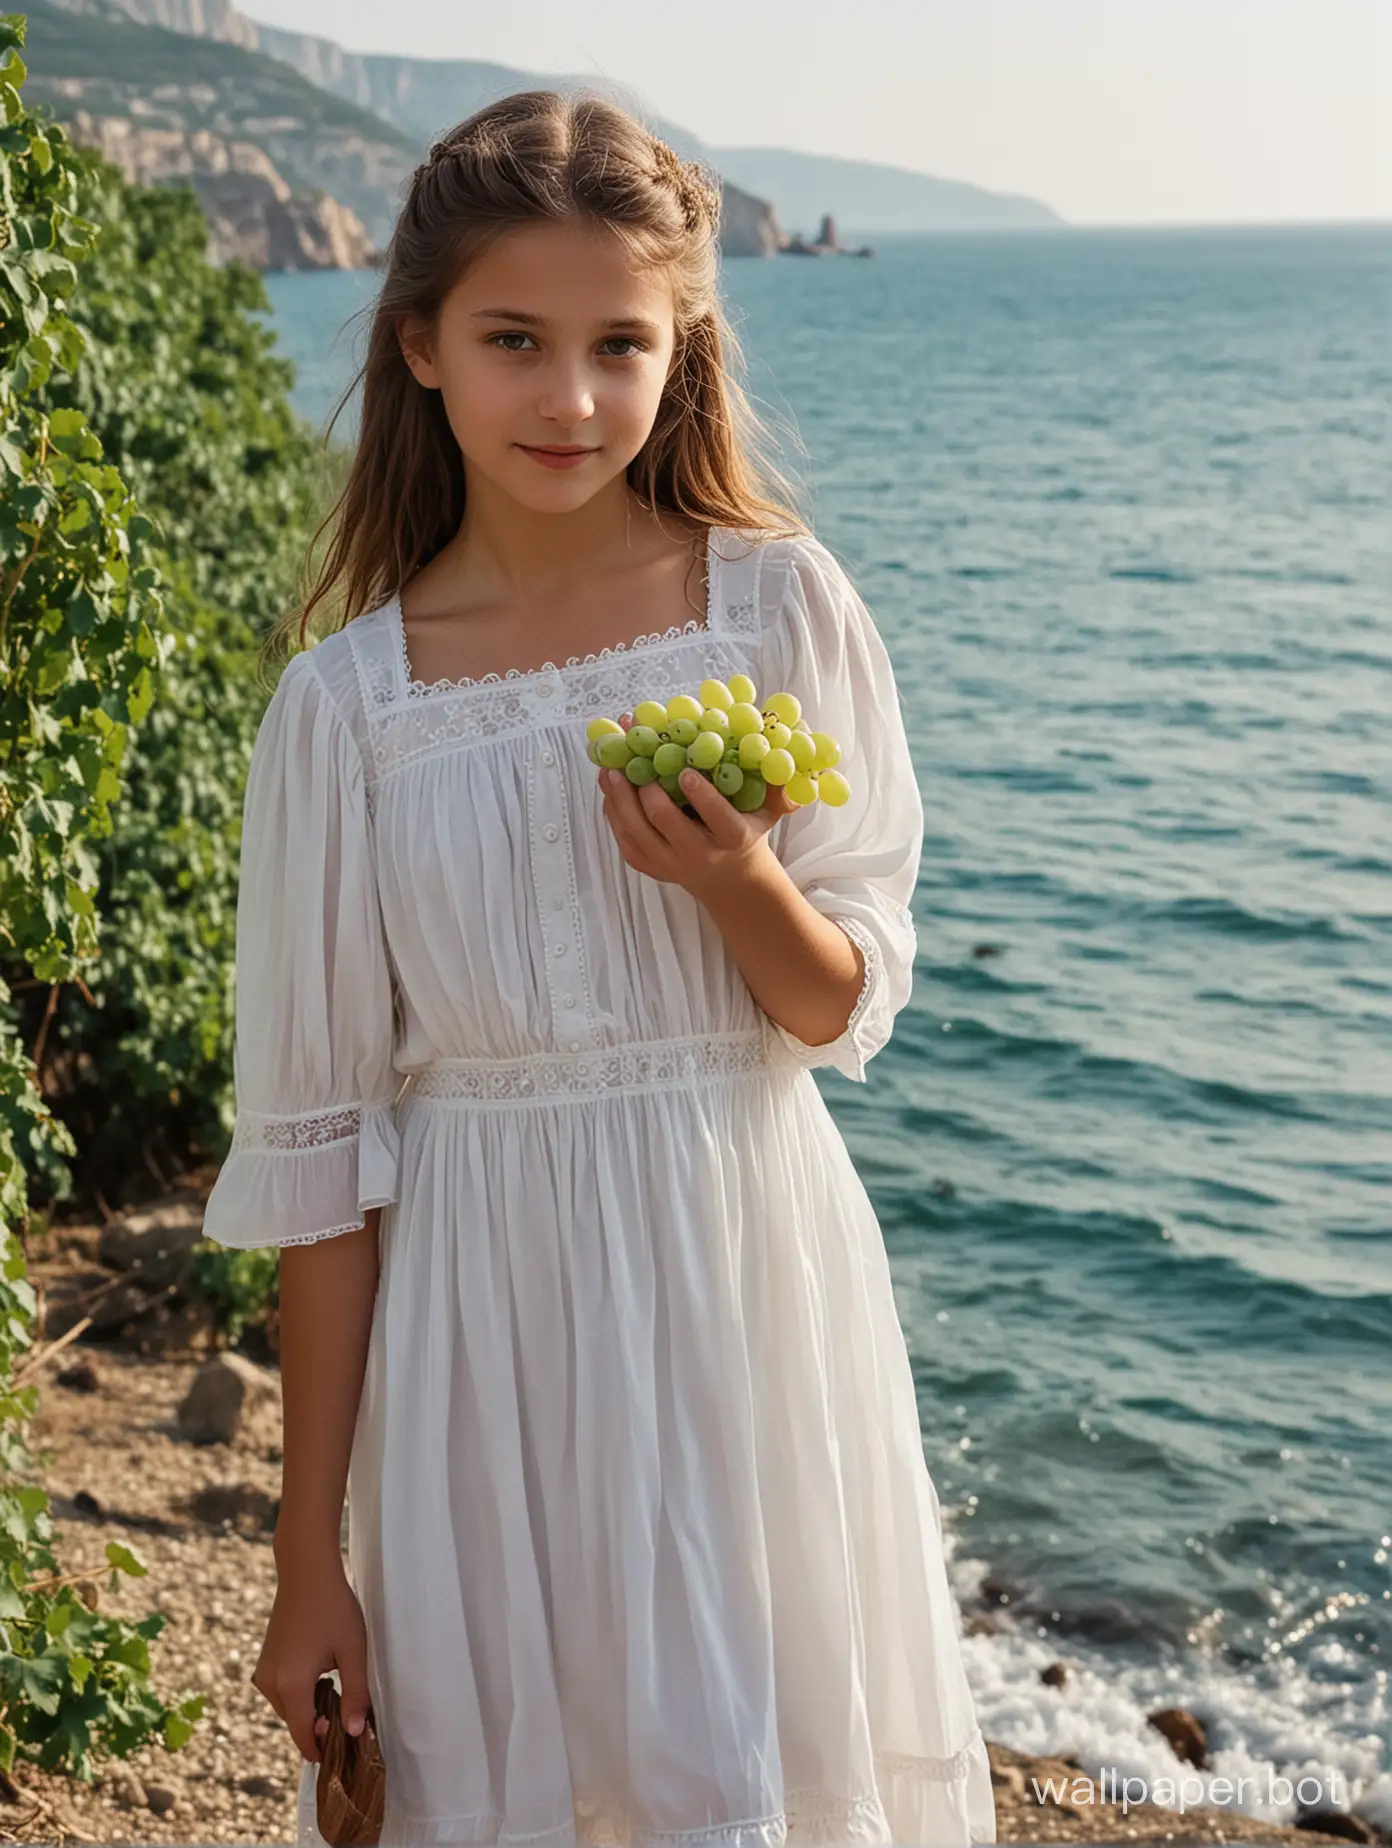 Crimea, by the sea, a girl of 11 in a short white dress with a bunch of grapes in her hands